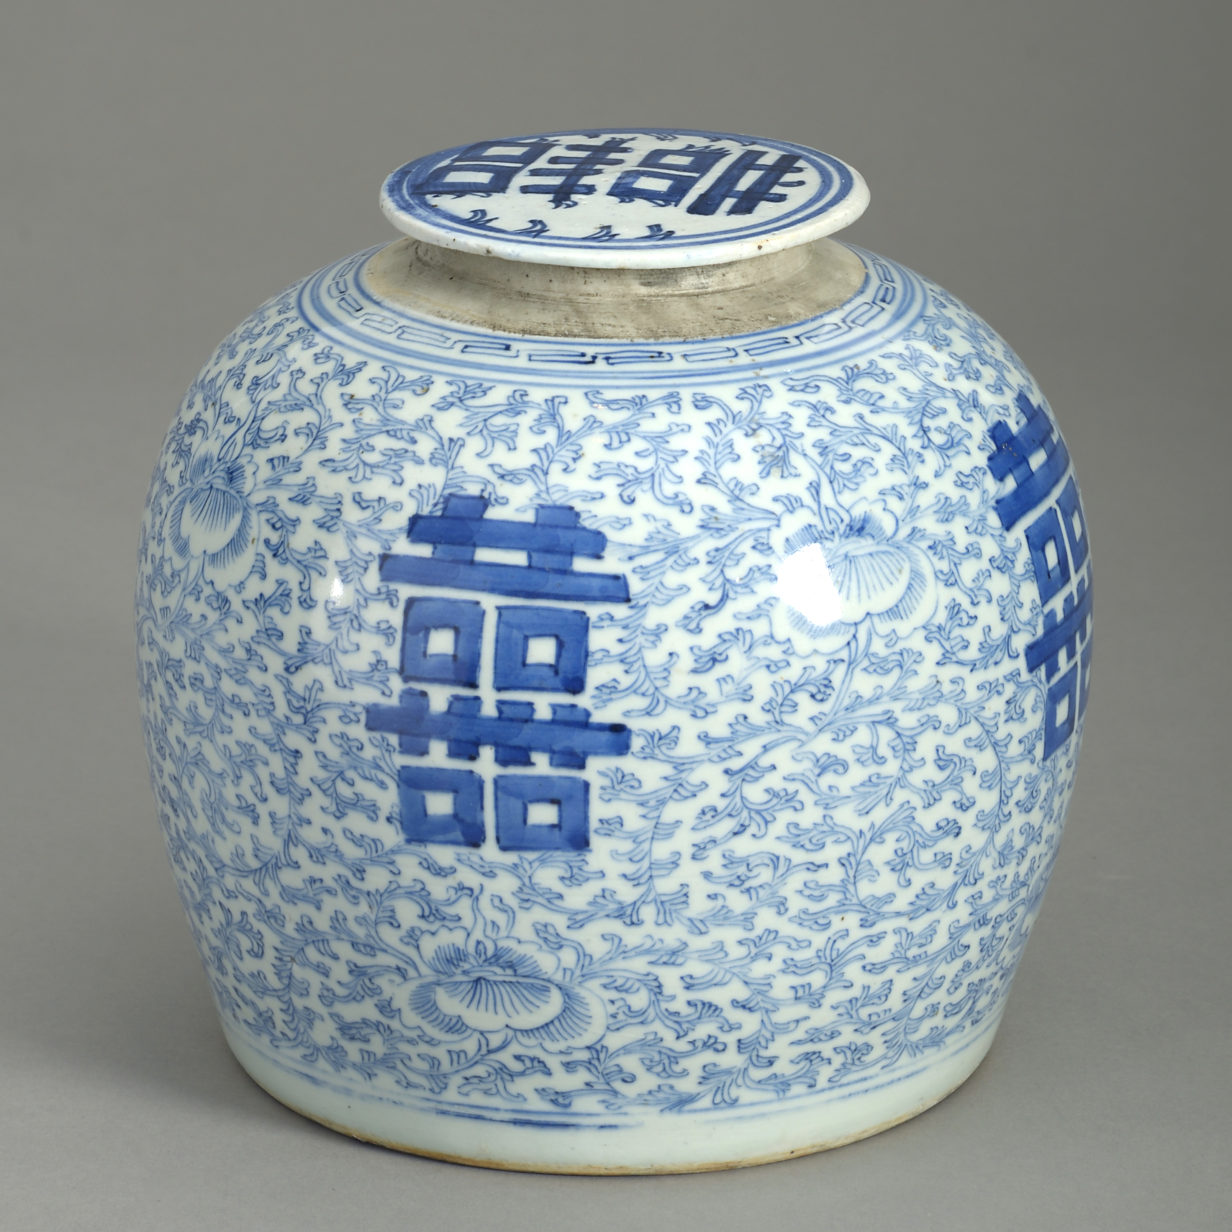 Early 19th century blue and white porcelain jar and cover